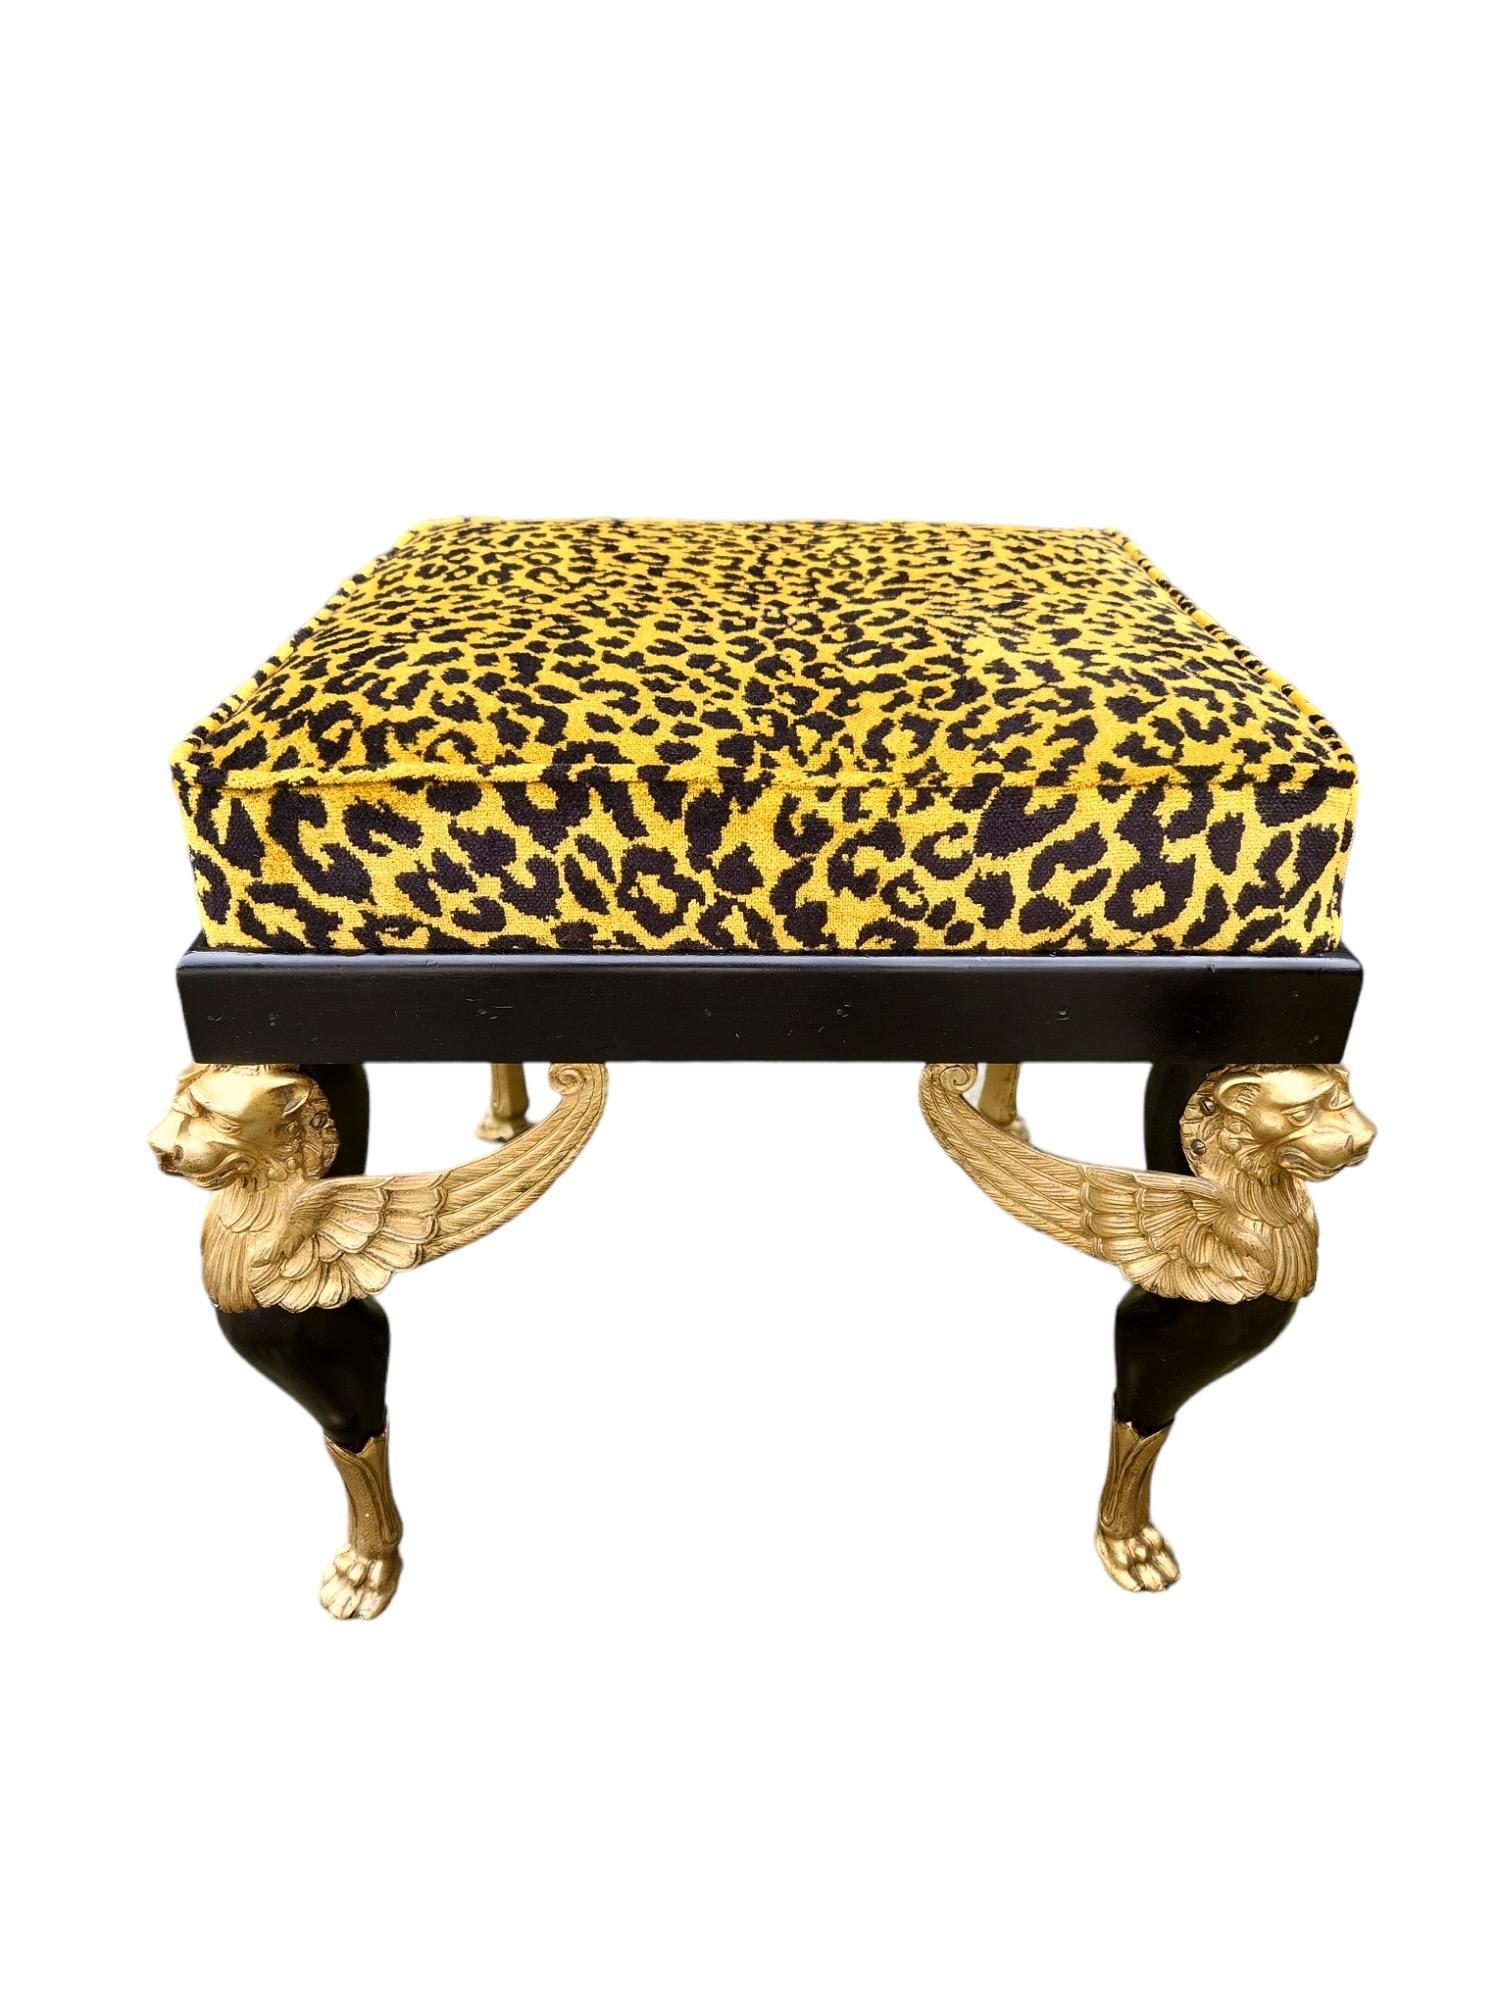 Newly-upholstered in Cheetah pattern fabric. Nicely chased bronze mounts. Strong and sturdy. Very unusual.